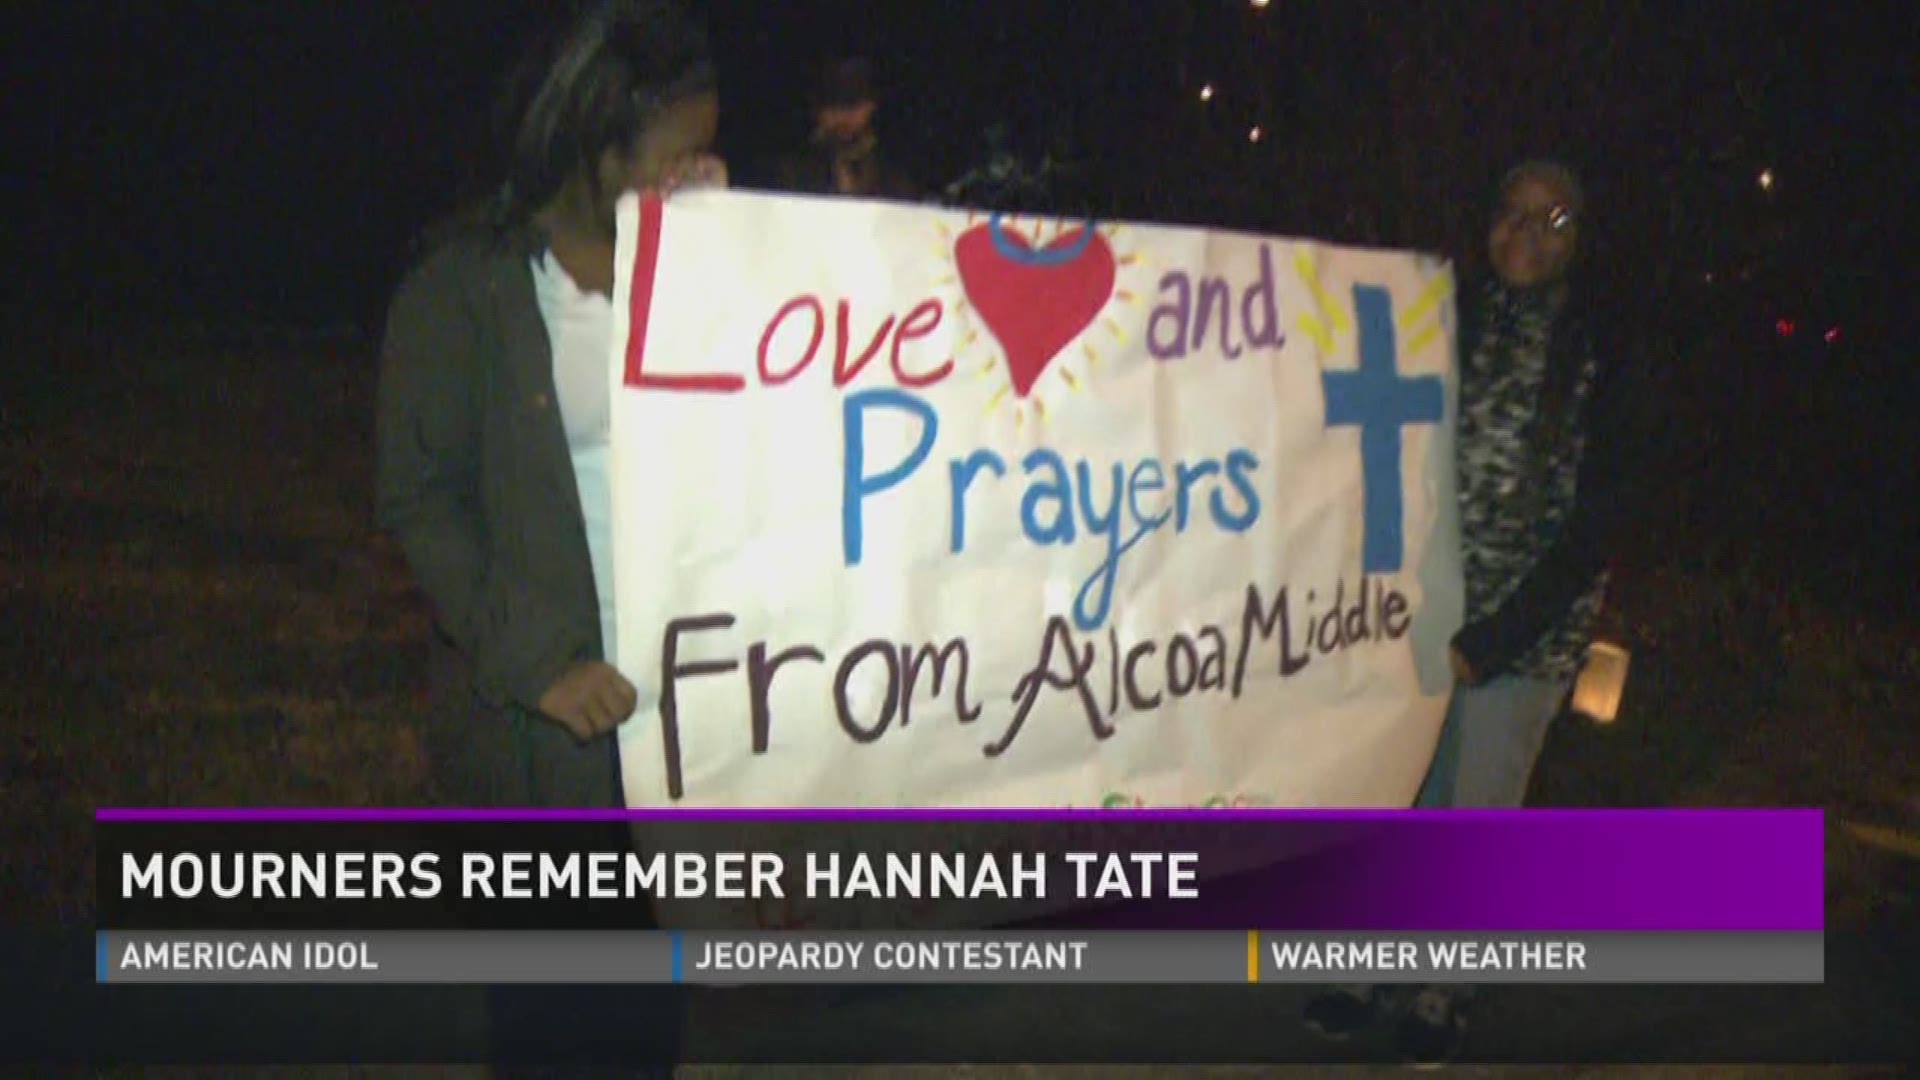 Hundreds of mourners gathered Wednesday night in Springbrook Park in Alcoa to remember Hannah Tate, who died Tuesday. Jan. 6, 2016